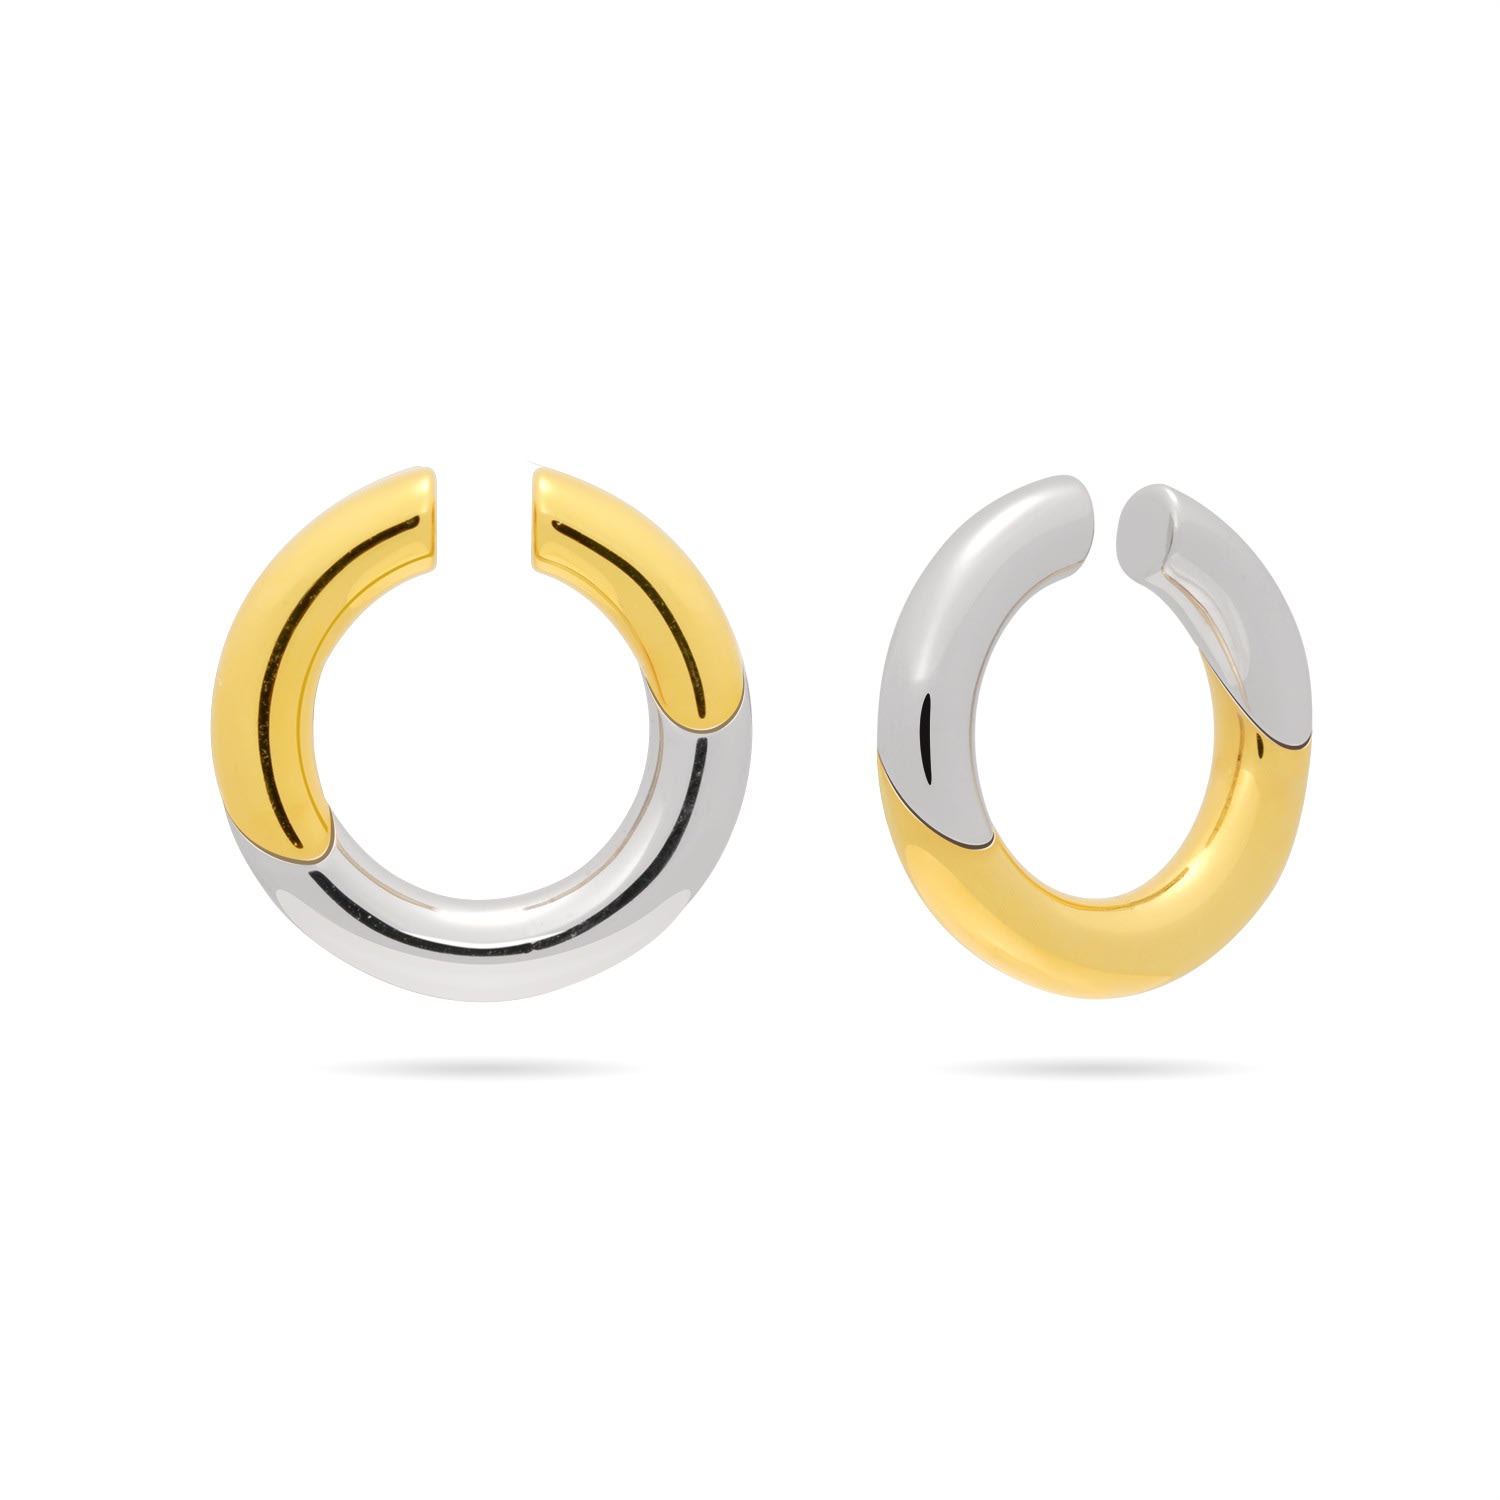 Meulien Women's Gold / Silver Gold And Silver Bi-color Ear Cuff - 2 Sections In Silver, 1 In Gold